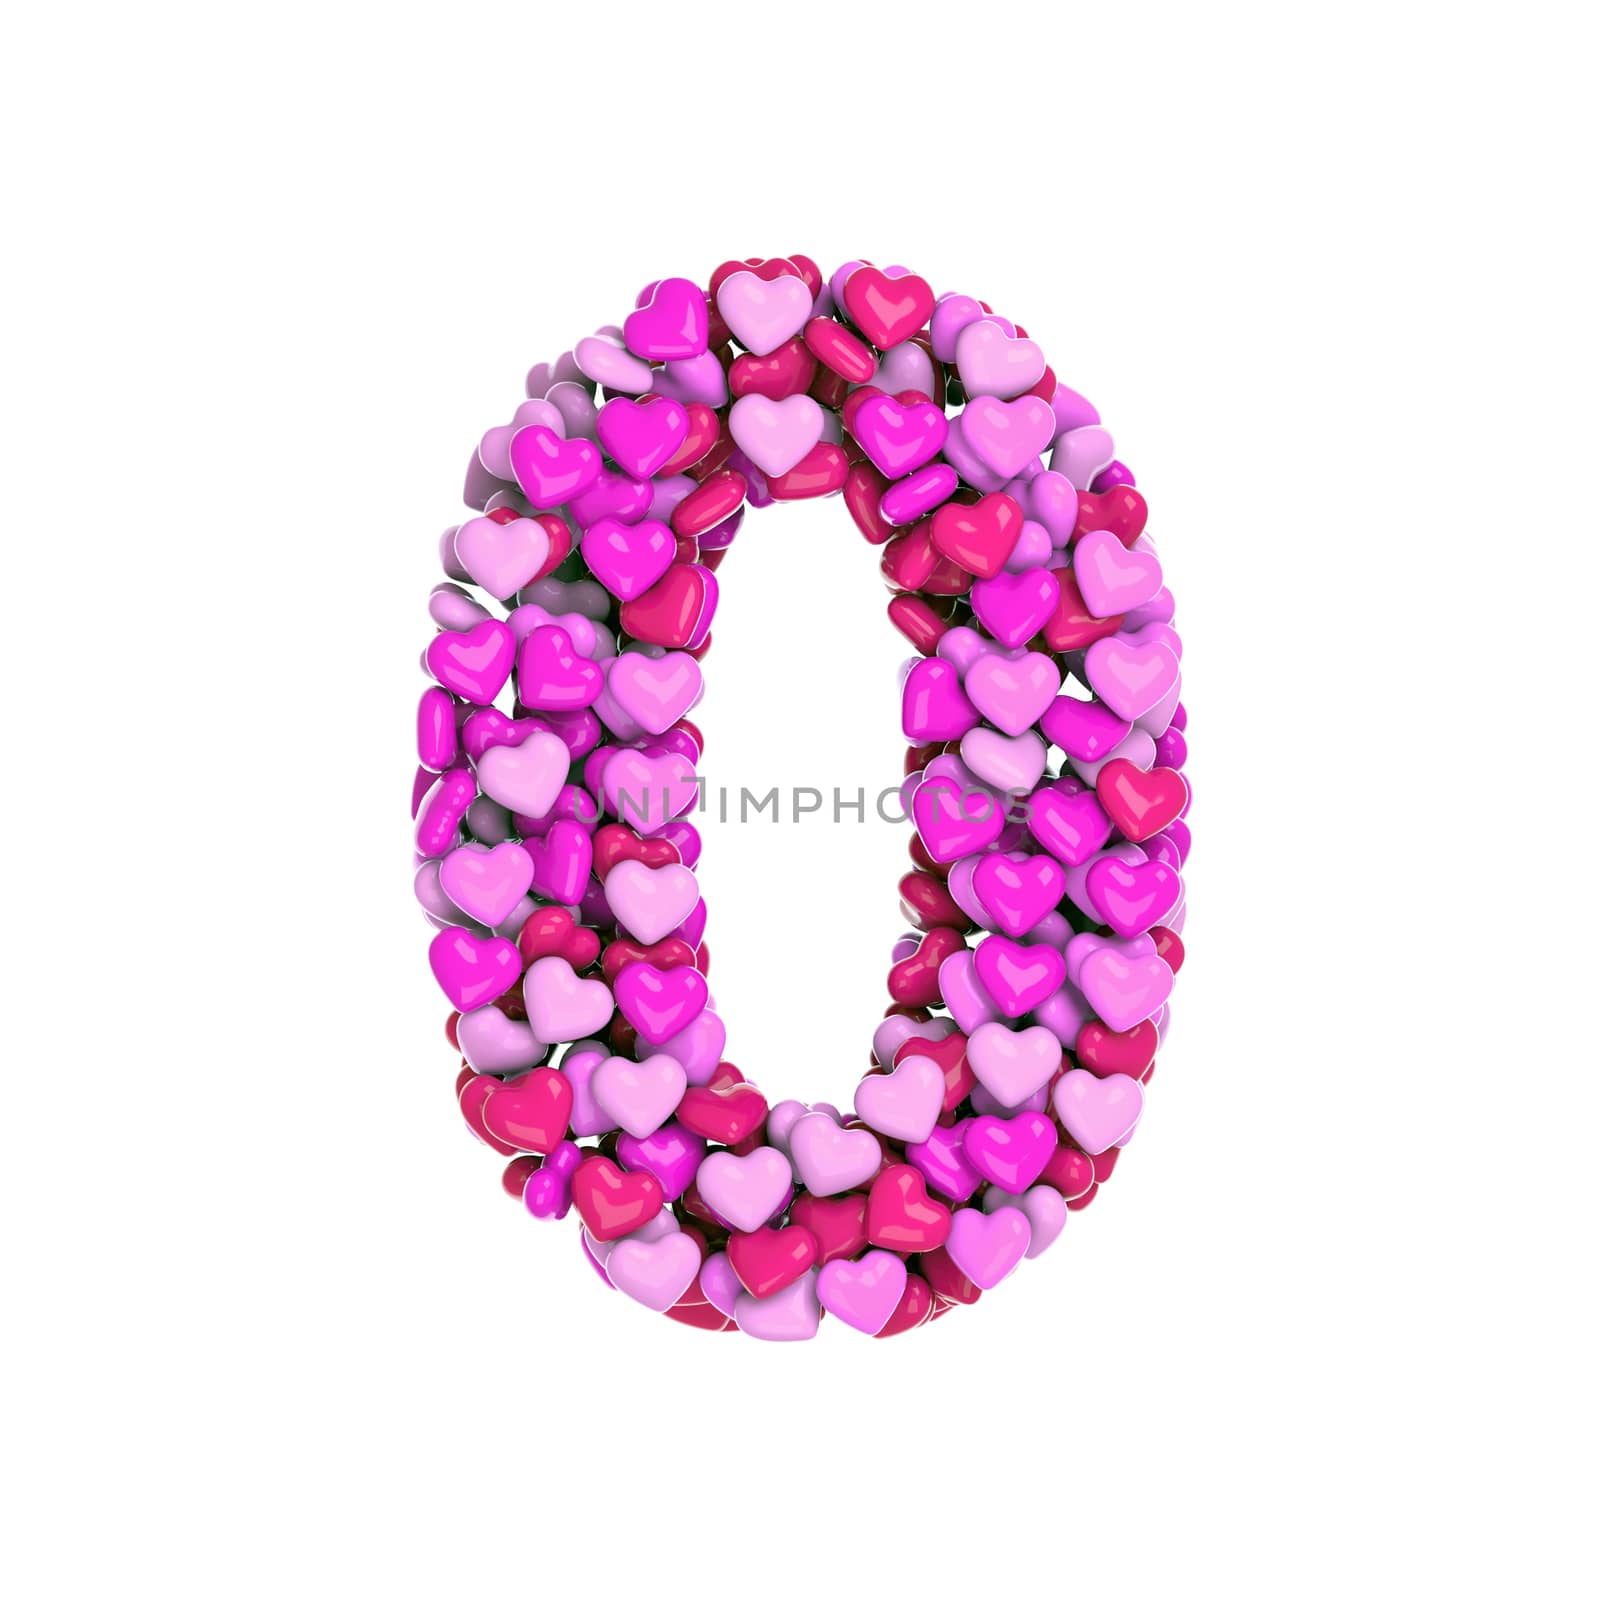 Valentine number 0 -  3d pink hearts digit - Love, passion or wedding concept by chrisroll